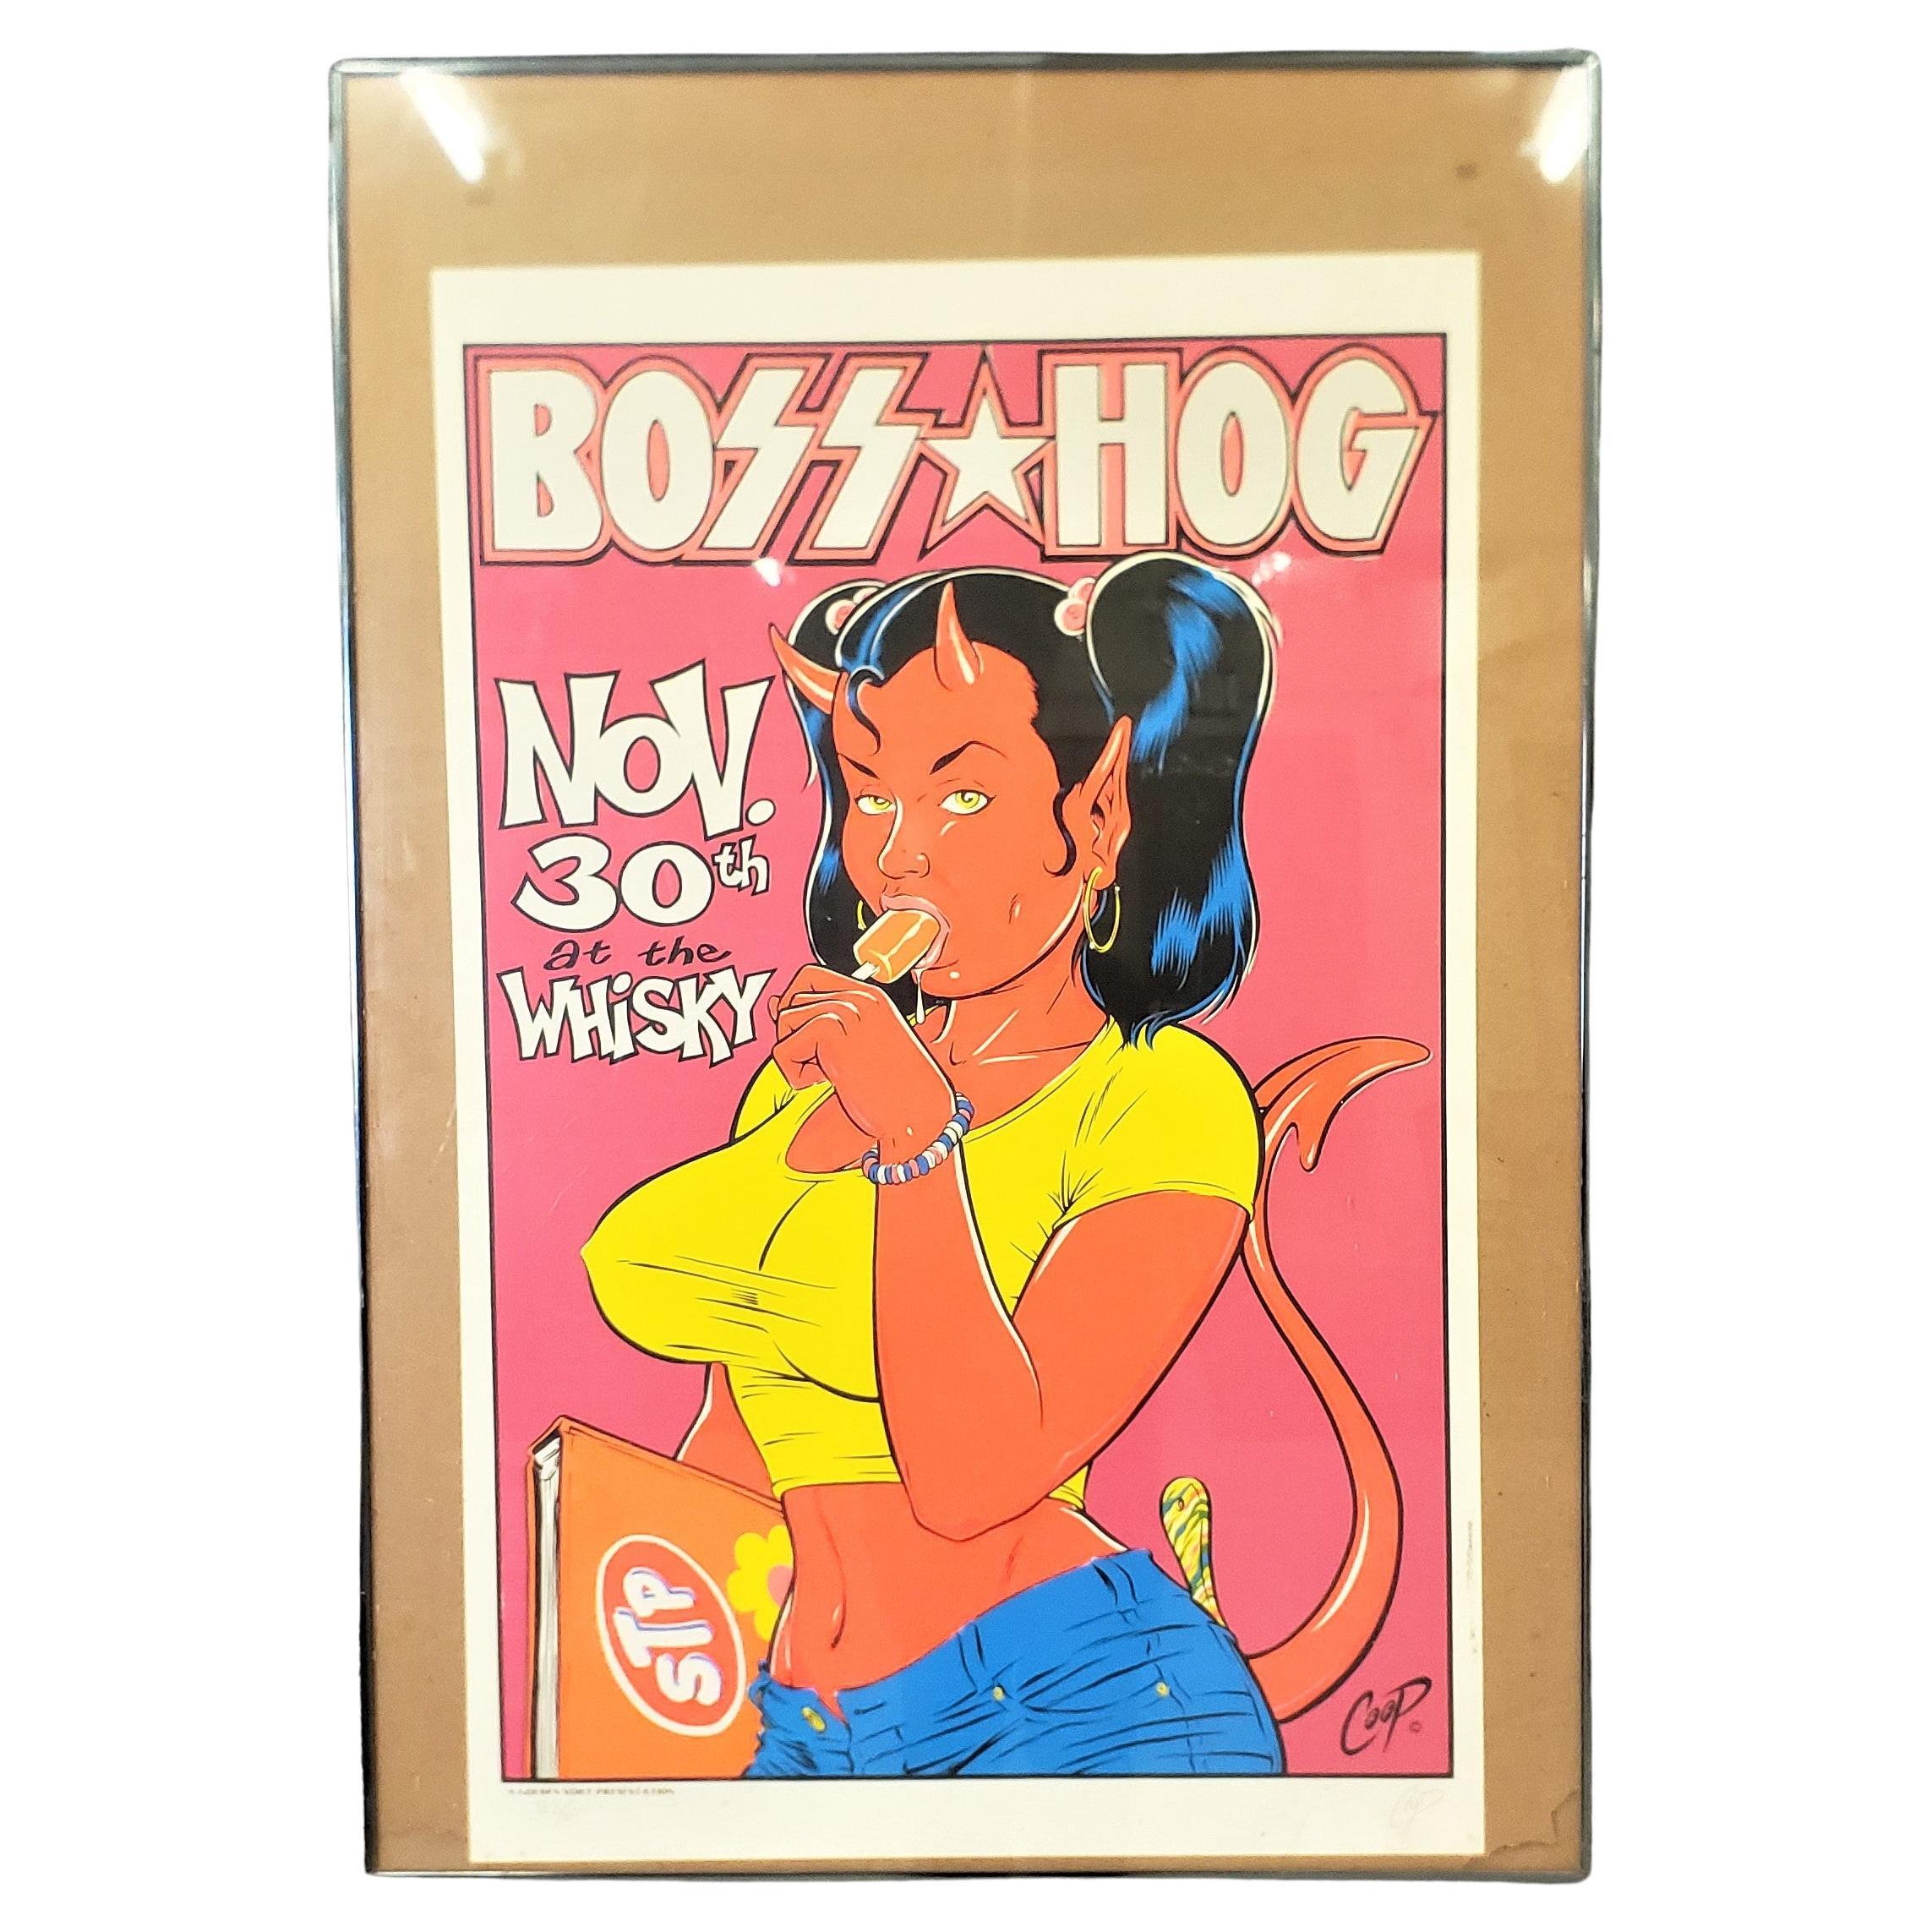 This vintge limited edition concert poster was done by Coop of the United States in approximately 1990 in a modern cartoon style. The poster is likely done by silkscreen on paper and is a poster done for the band Boss Hog playing at the Whiskey A